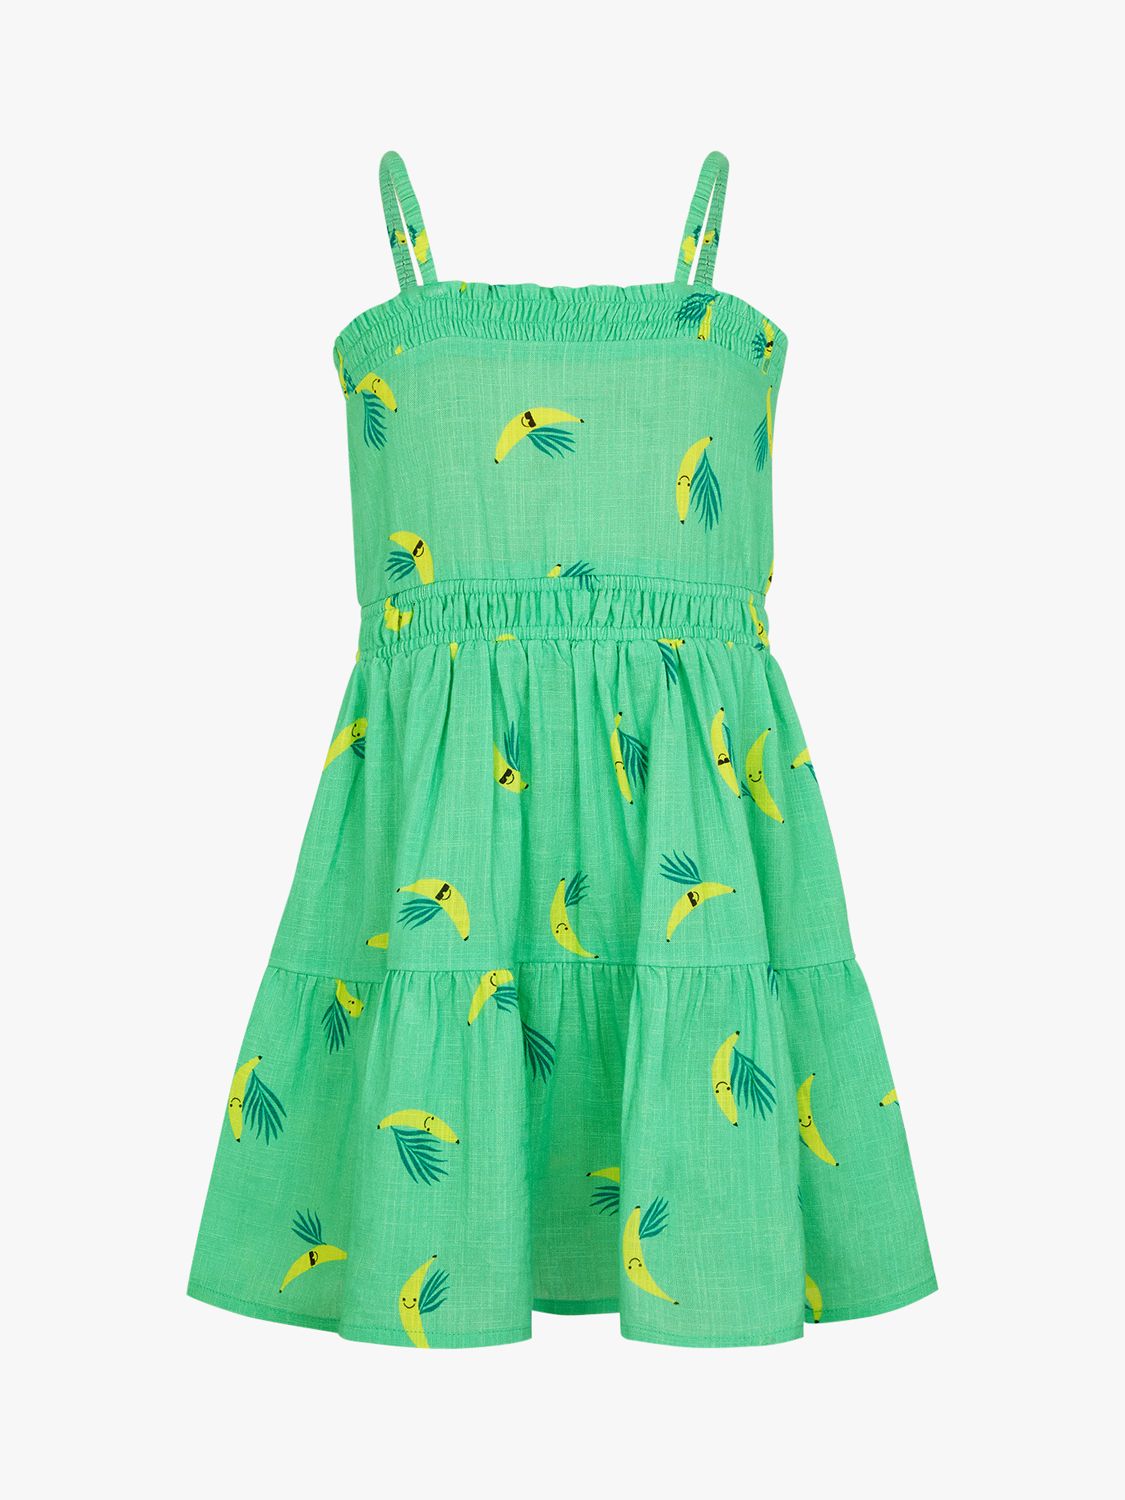 Angels by Accessorize Kids' Banana Print Tiered Dress, Green, 18-24 months